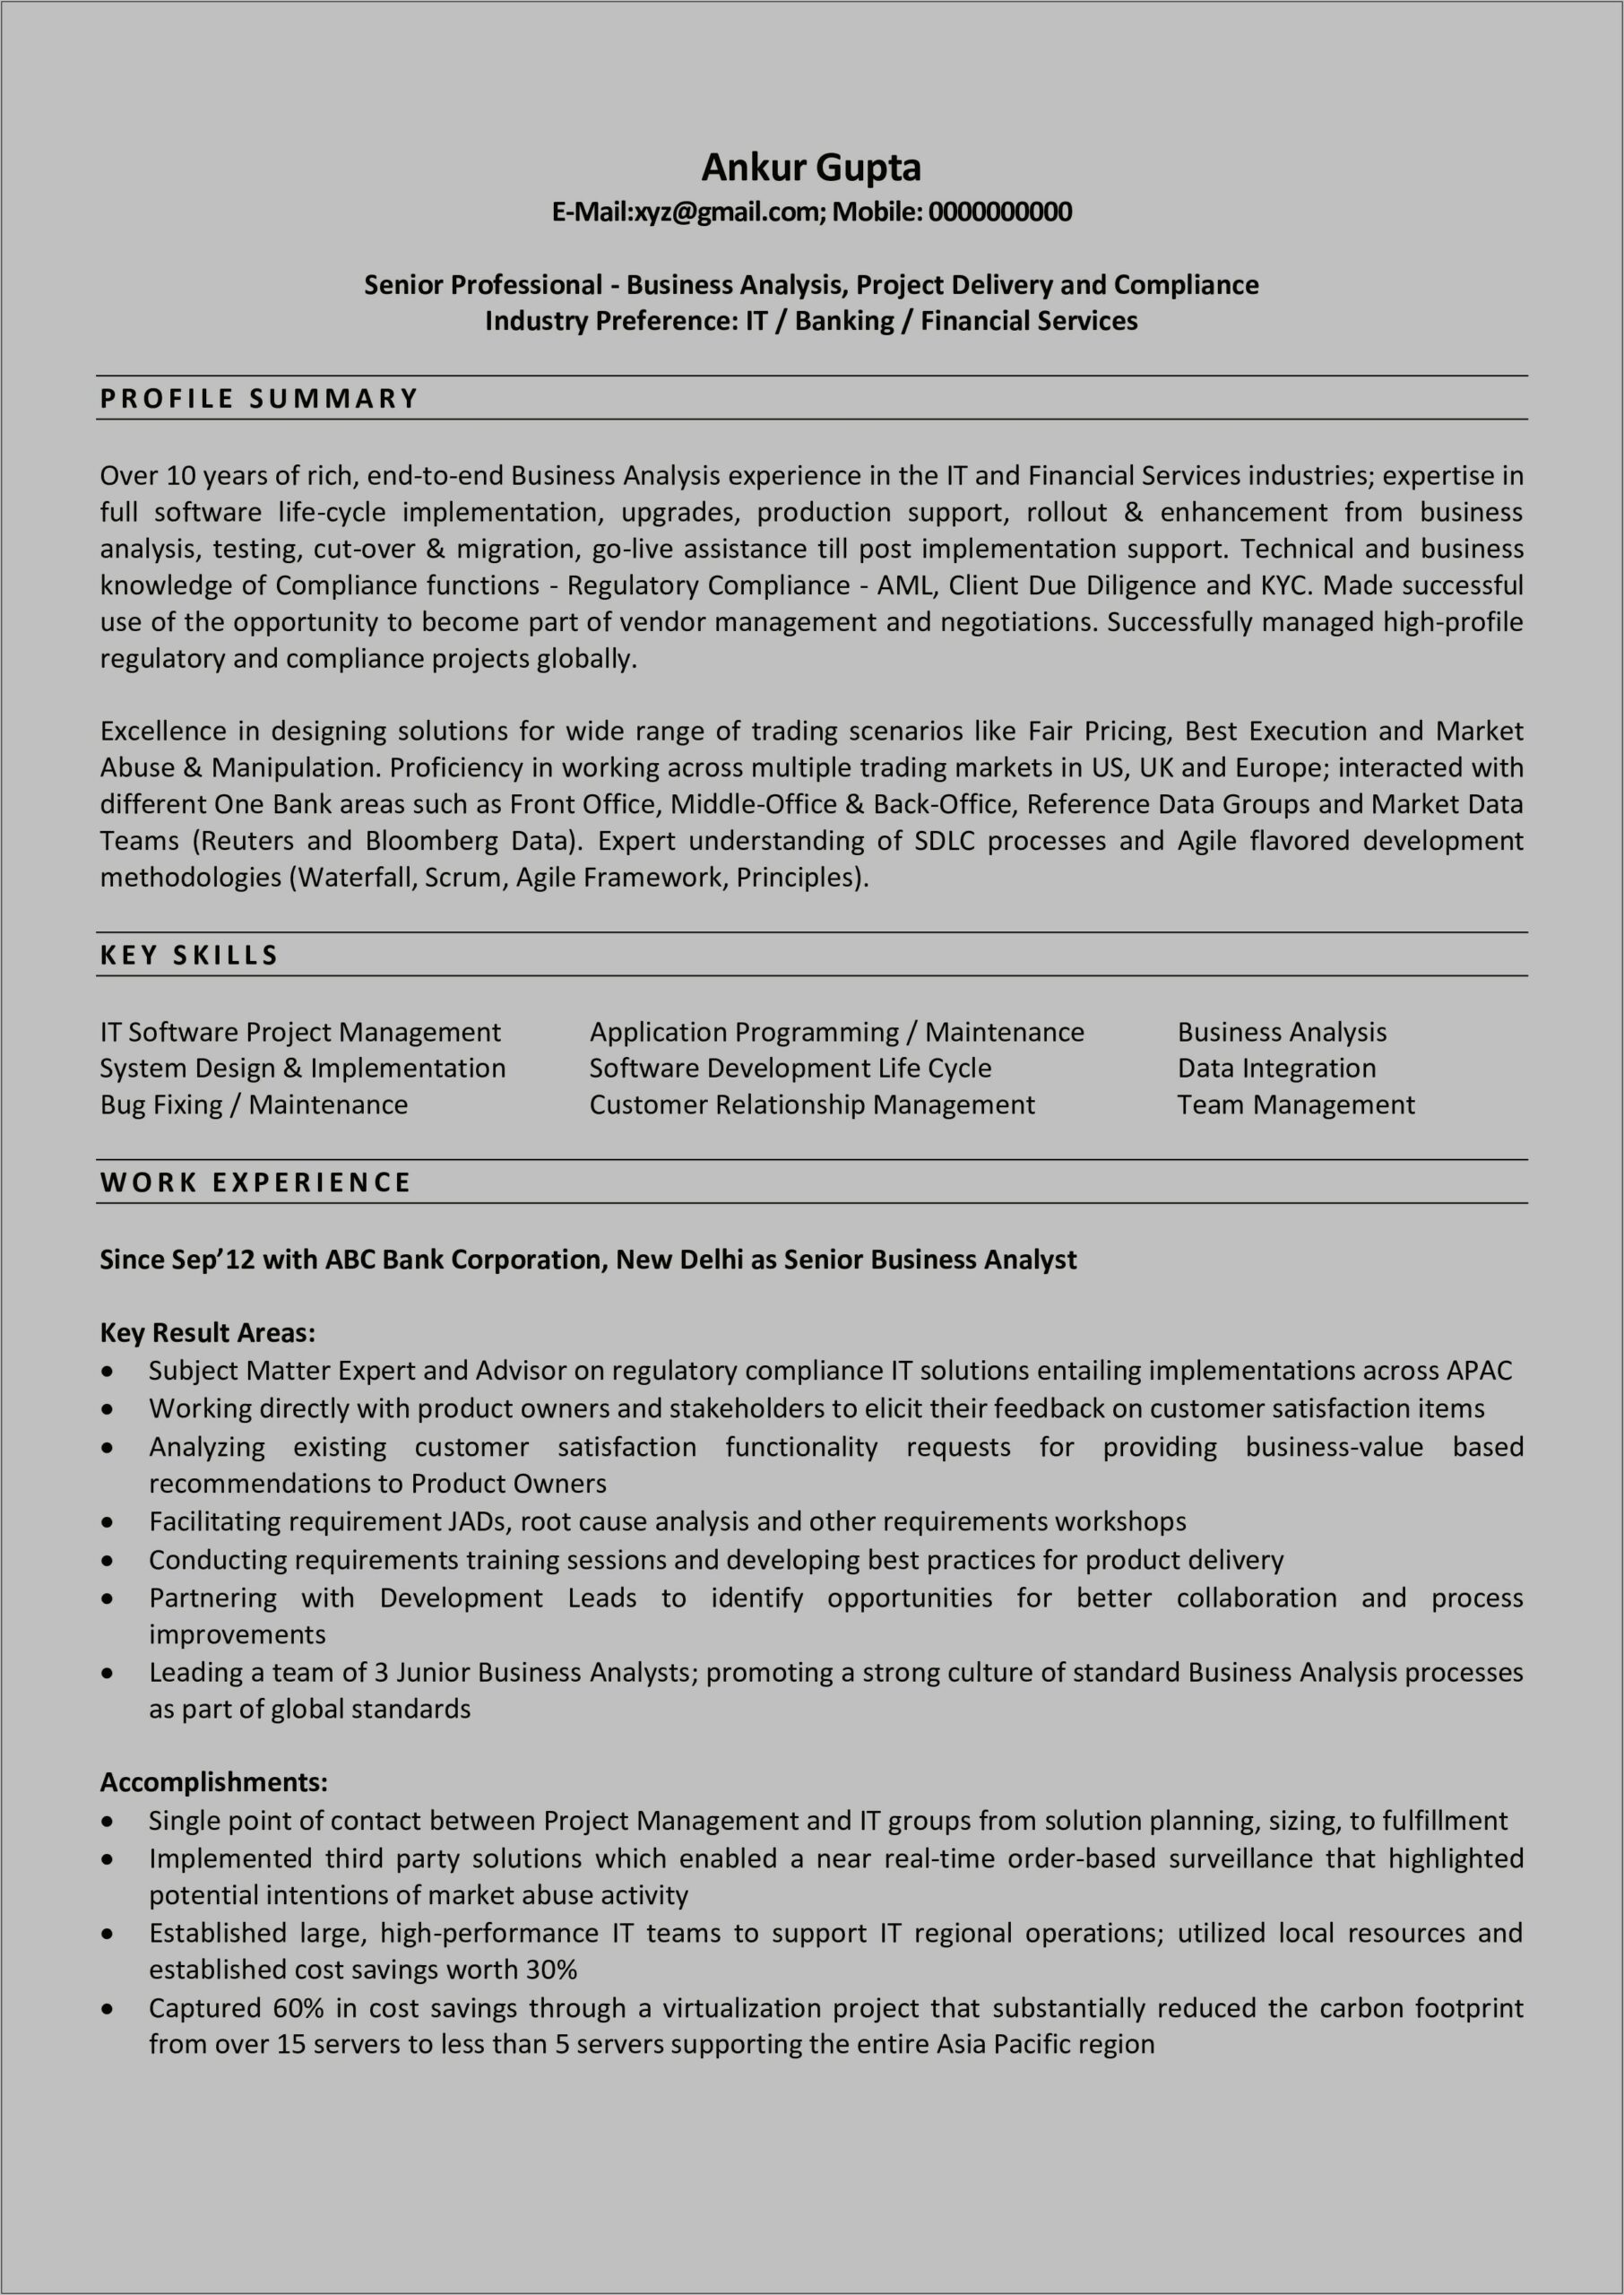 Sample Business Systems Analyst Resume Summary